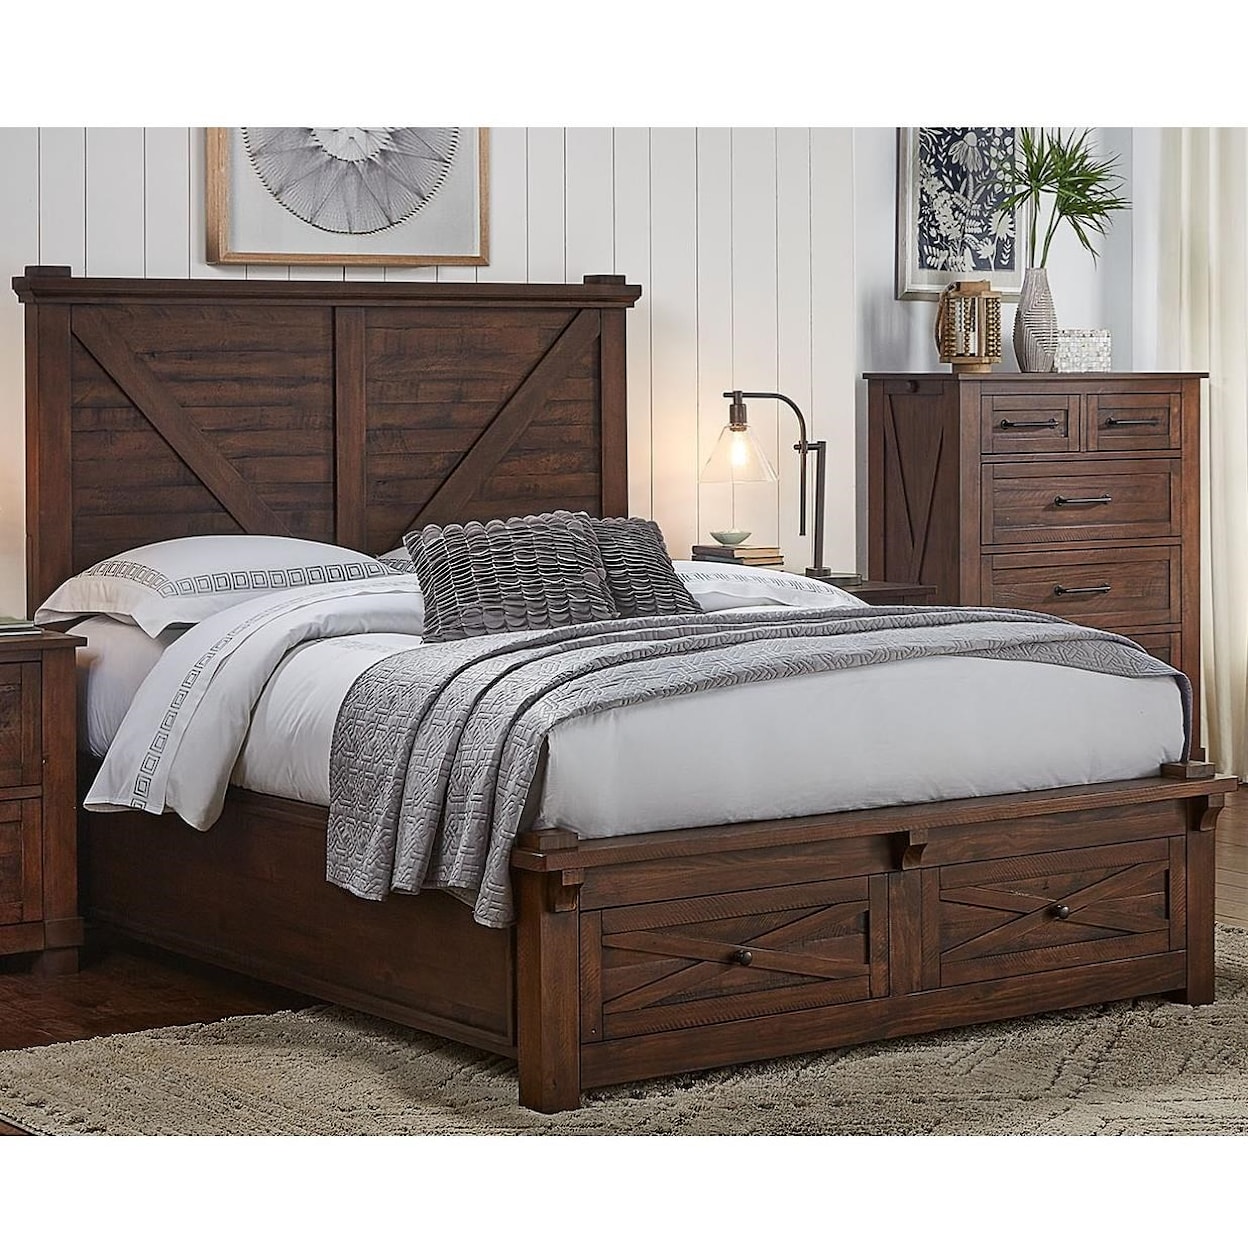 AAmerica Sun Valley King Bed with Footboard Bench